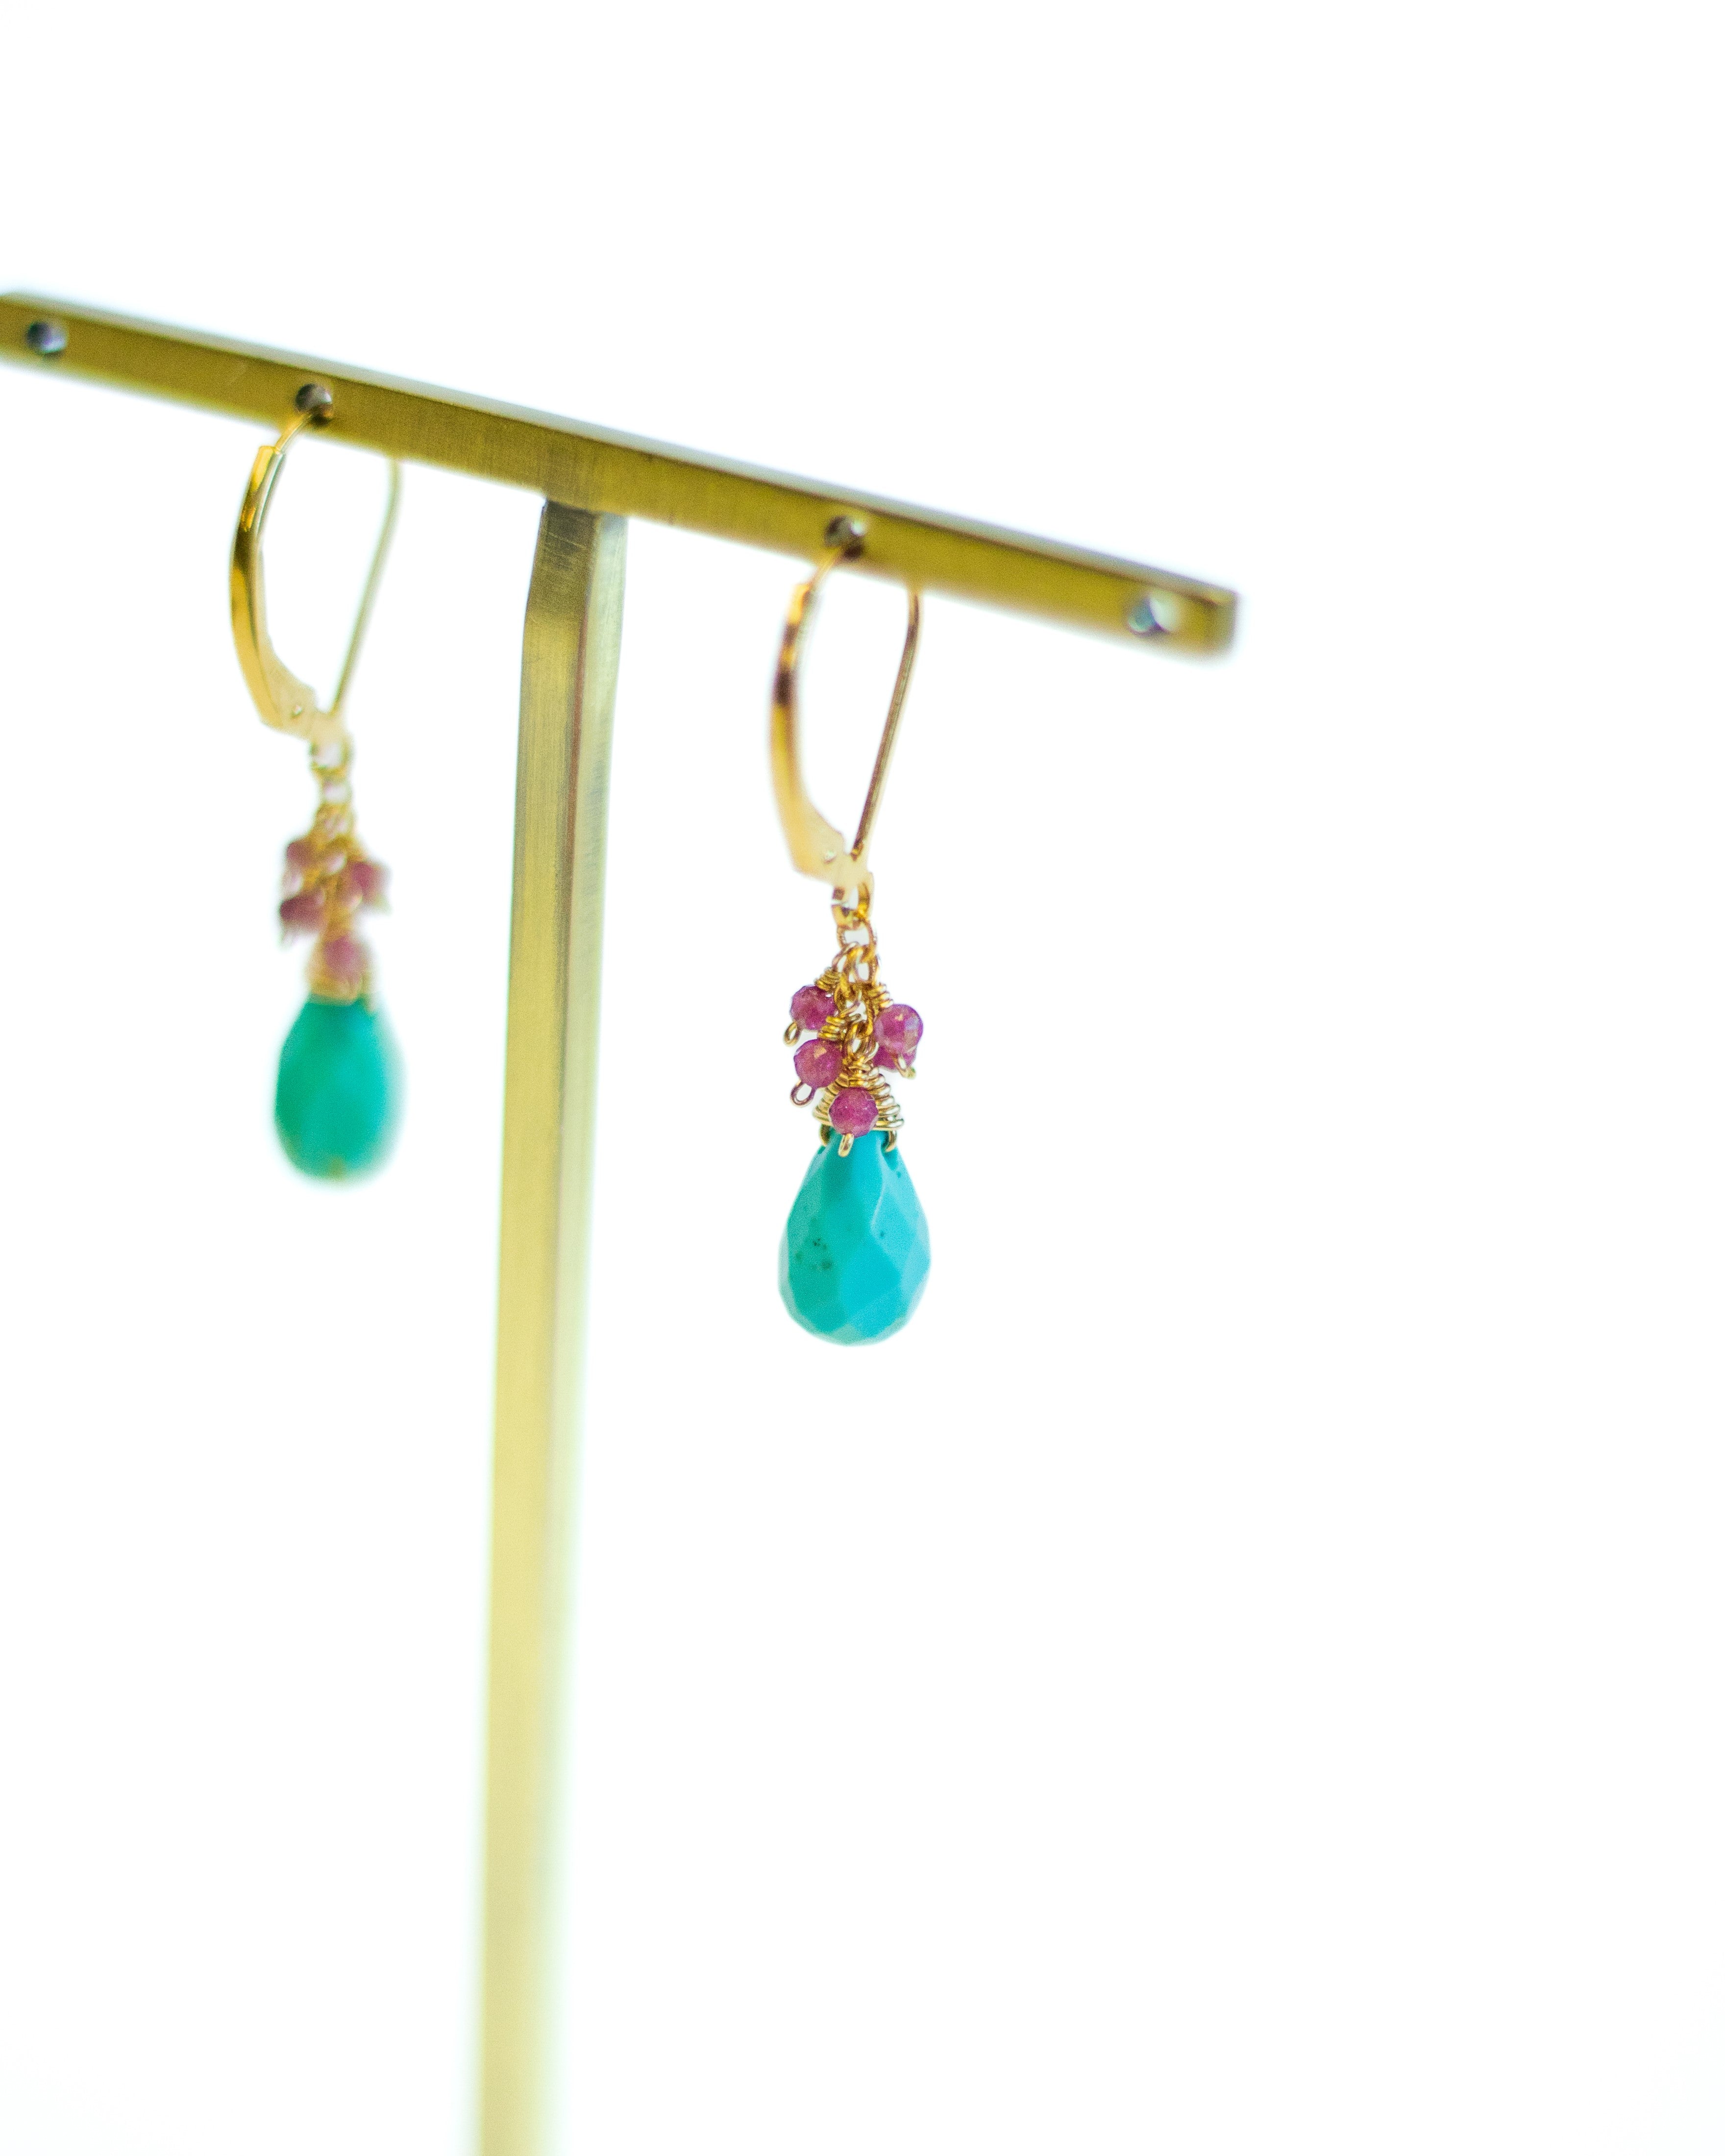 Turquoise & Ruby Earrings by Julia Balestracci